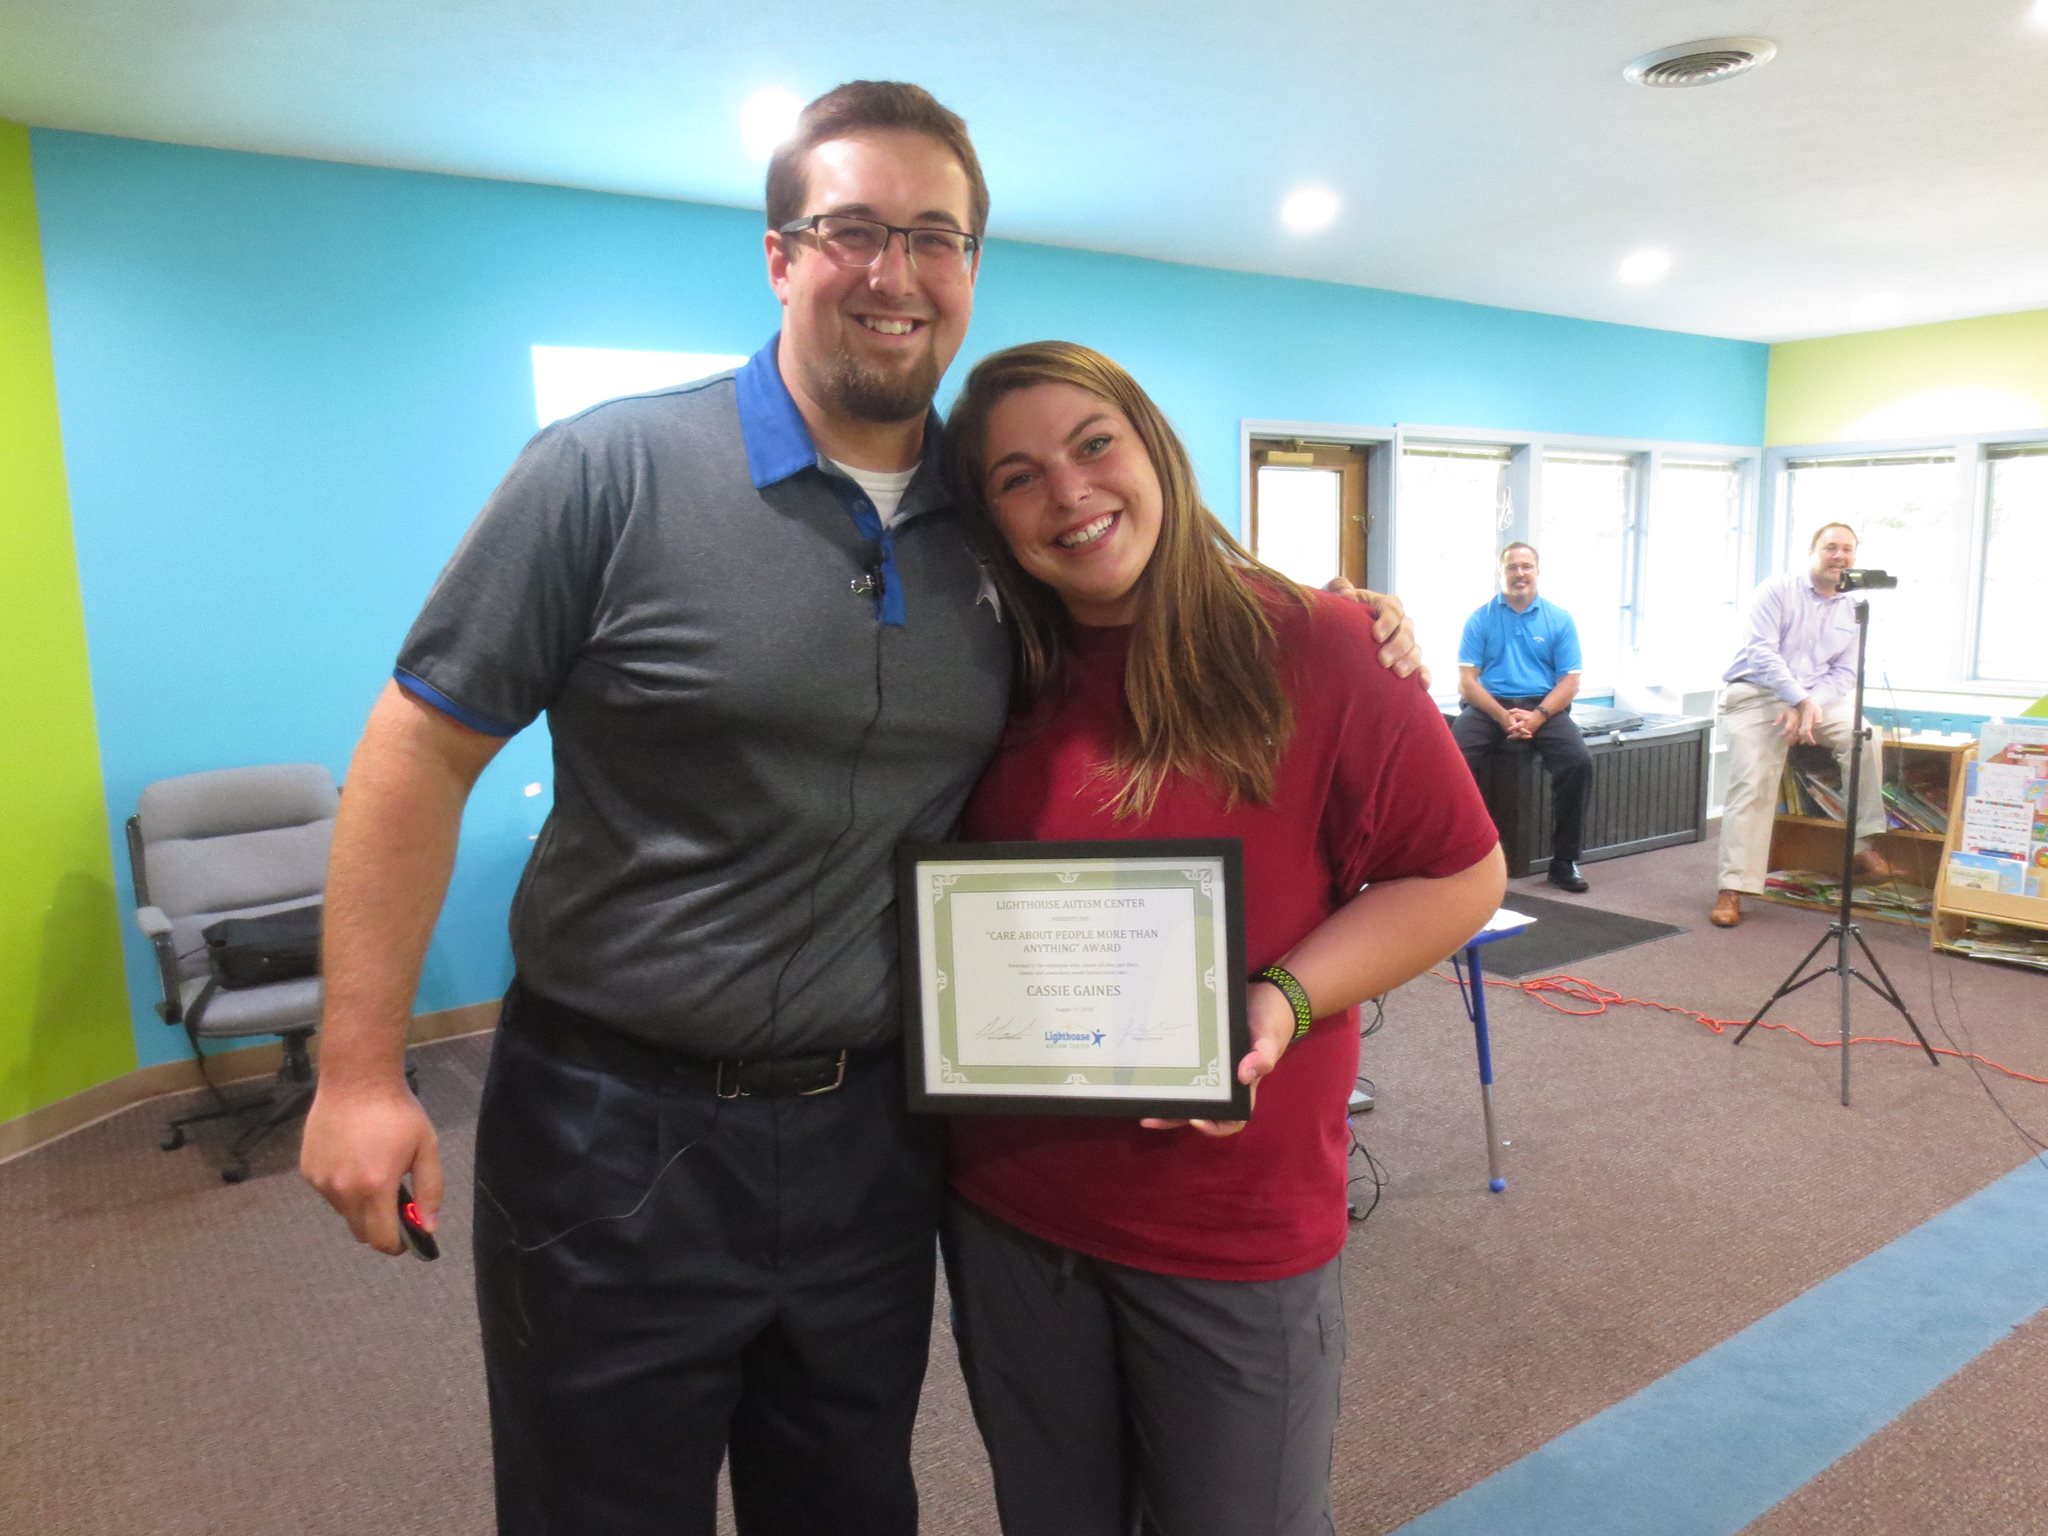 Lighthouse Autism Center Award Winner, Cassie Gaines: Care about People More than Anything